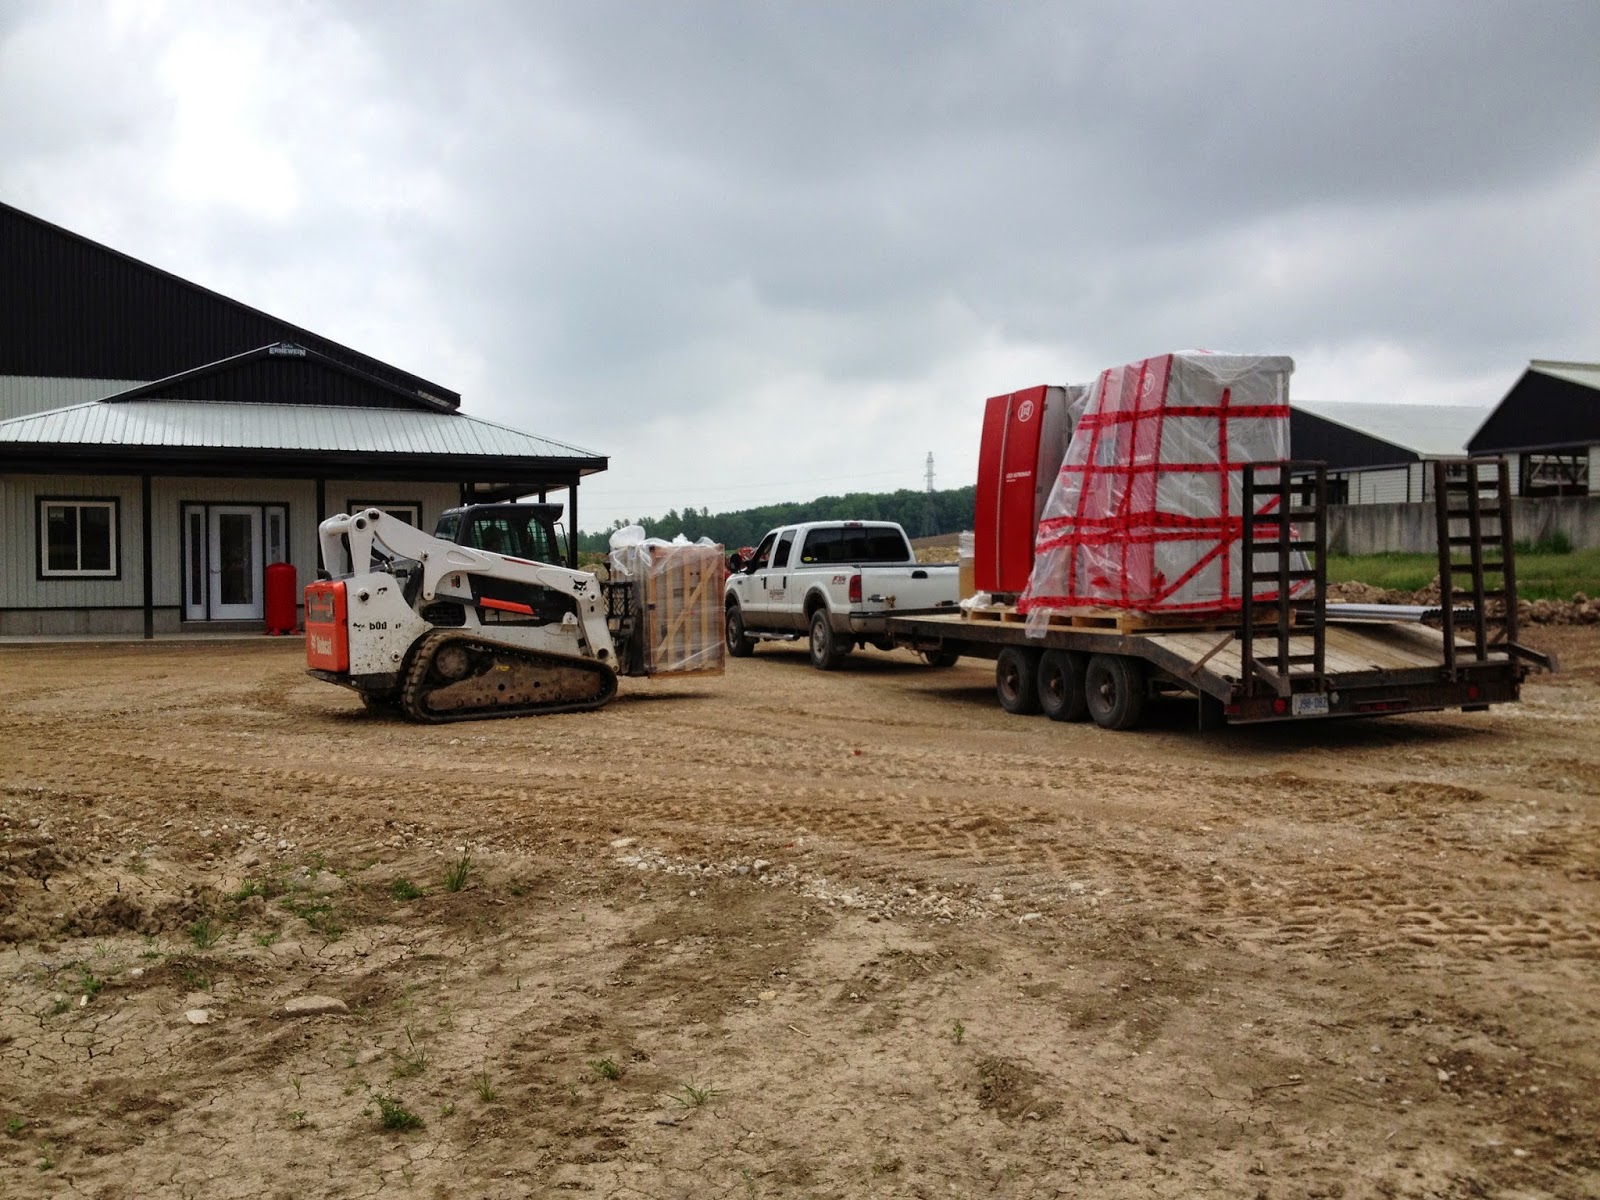 Lely A4 Astronaut Robot arriving from Avonbank Ag Solutions